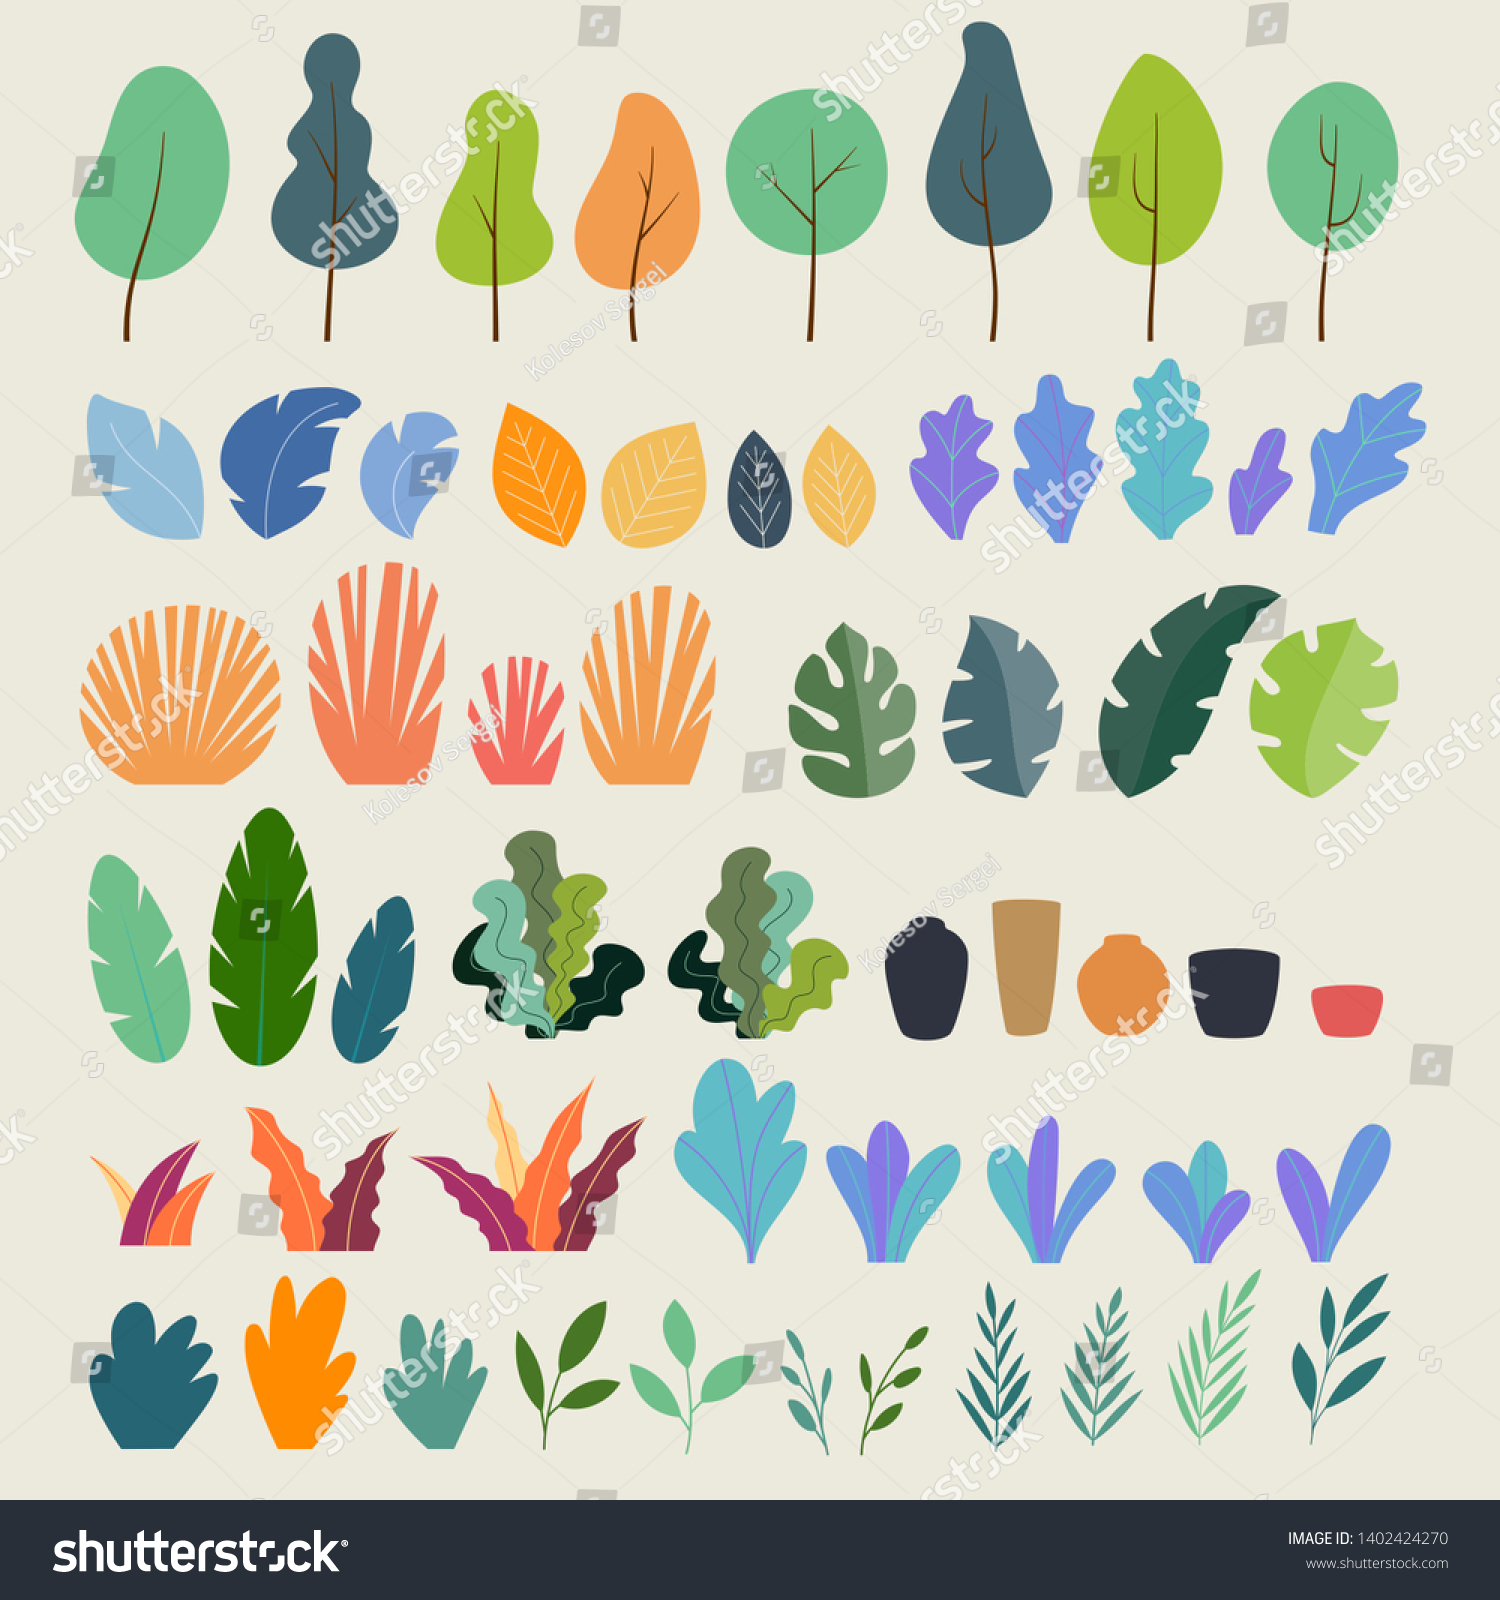 Vector set of flat illustrations of plants, trees, leaves, branches, bushes and pots. Flat cartoon vector illustration #1402424270